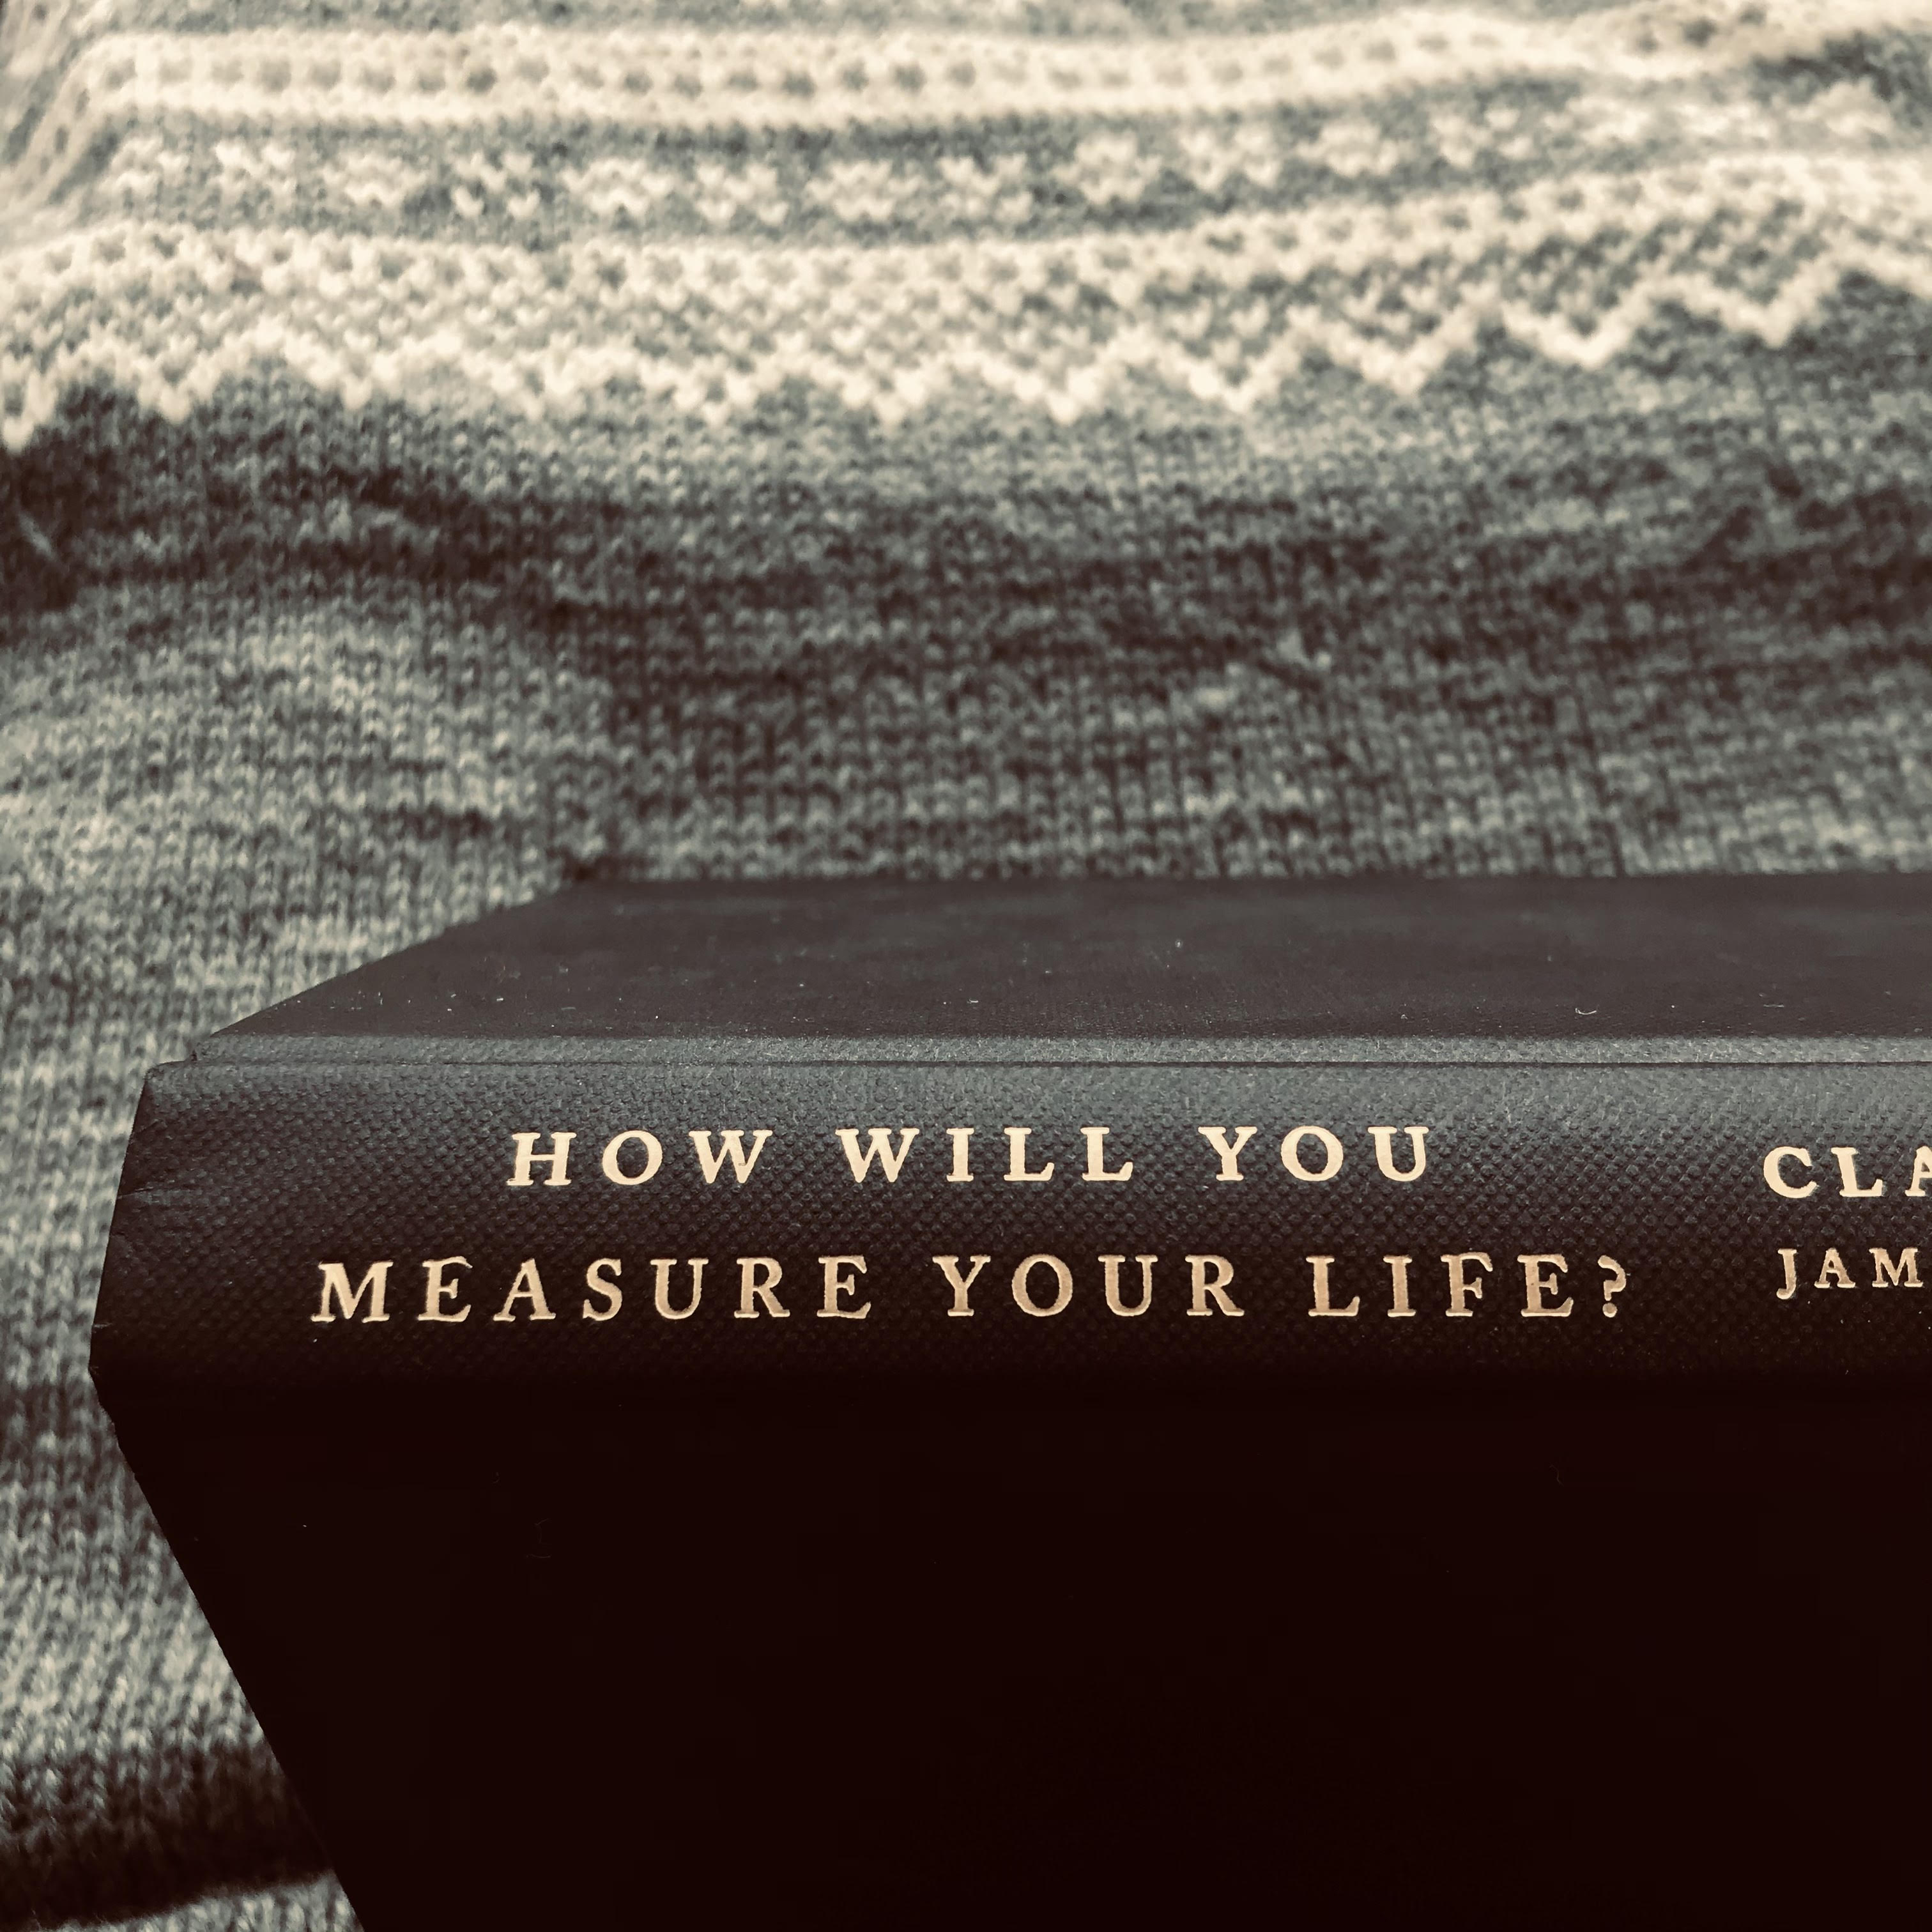 A photo of the book on my sweater.